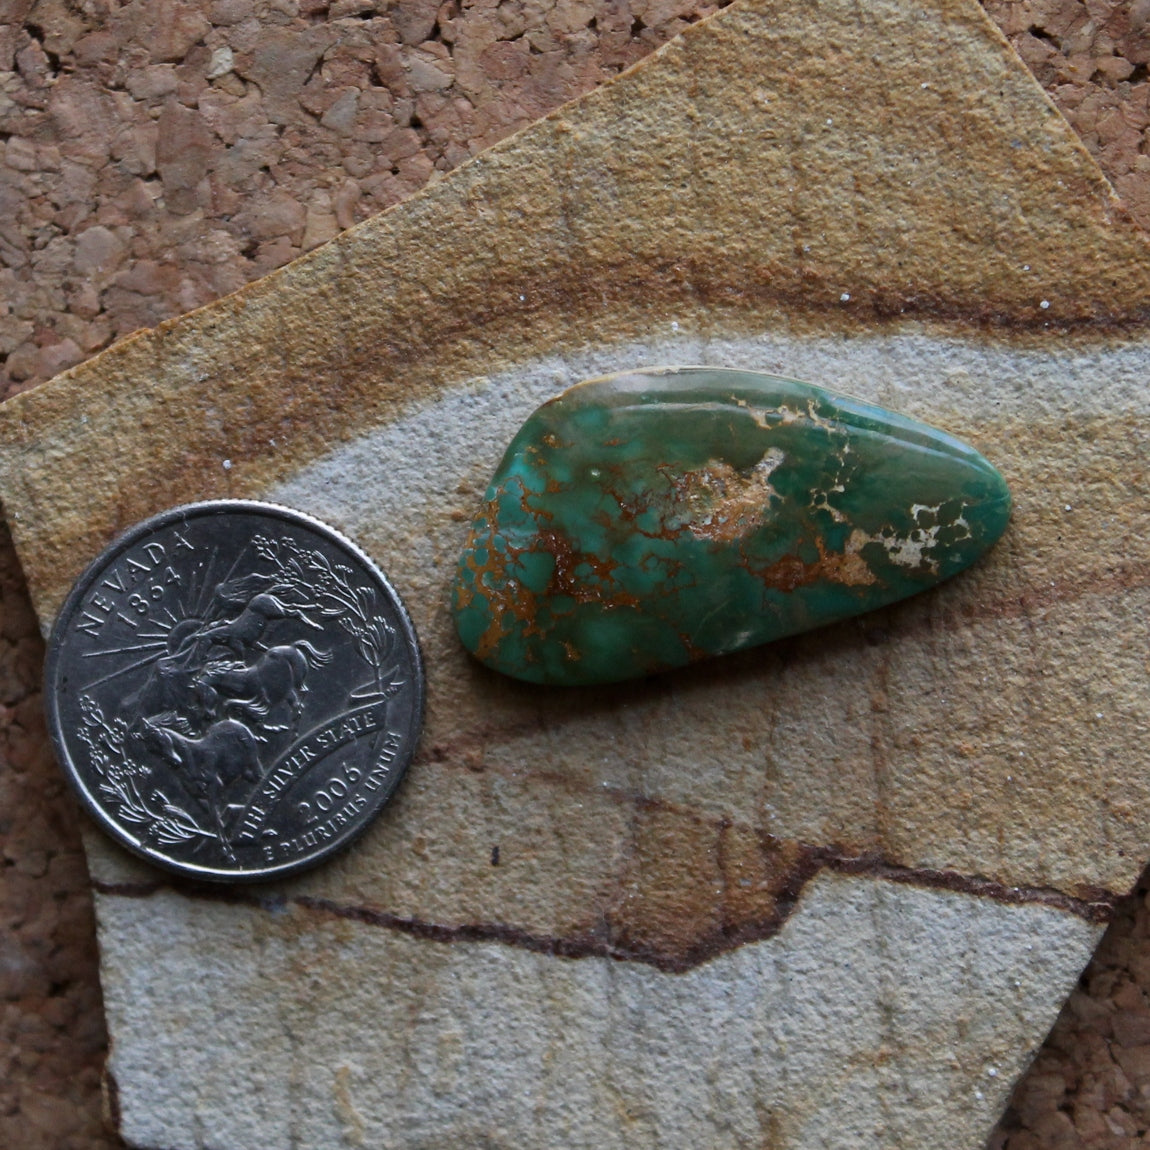 21.6 carat green Stone Mountain Turquoise cabochon with red matrix